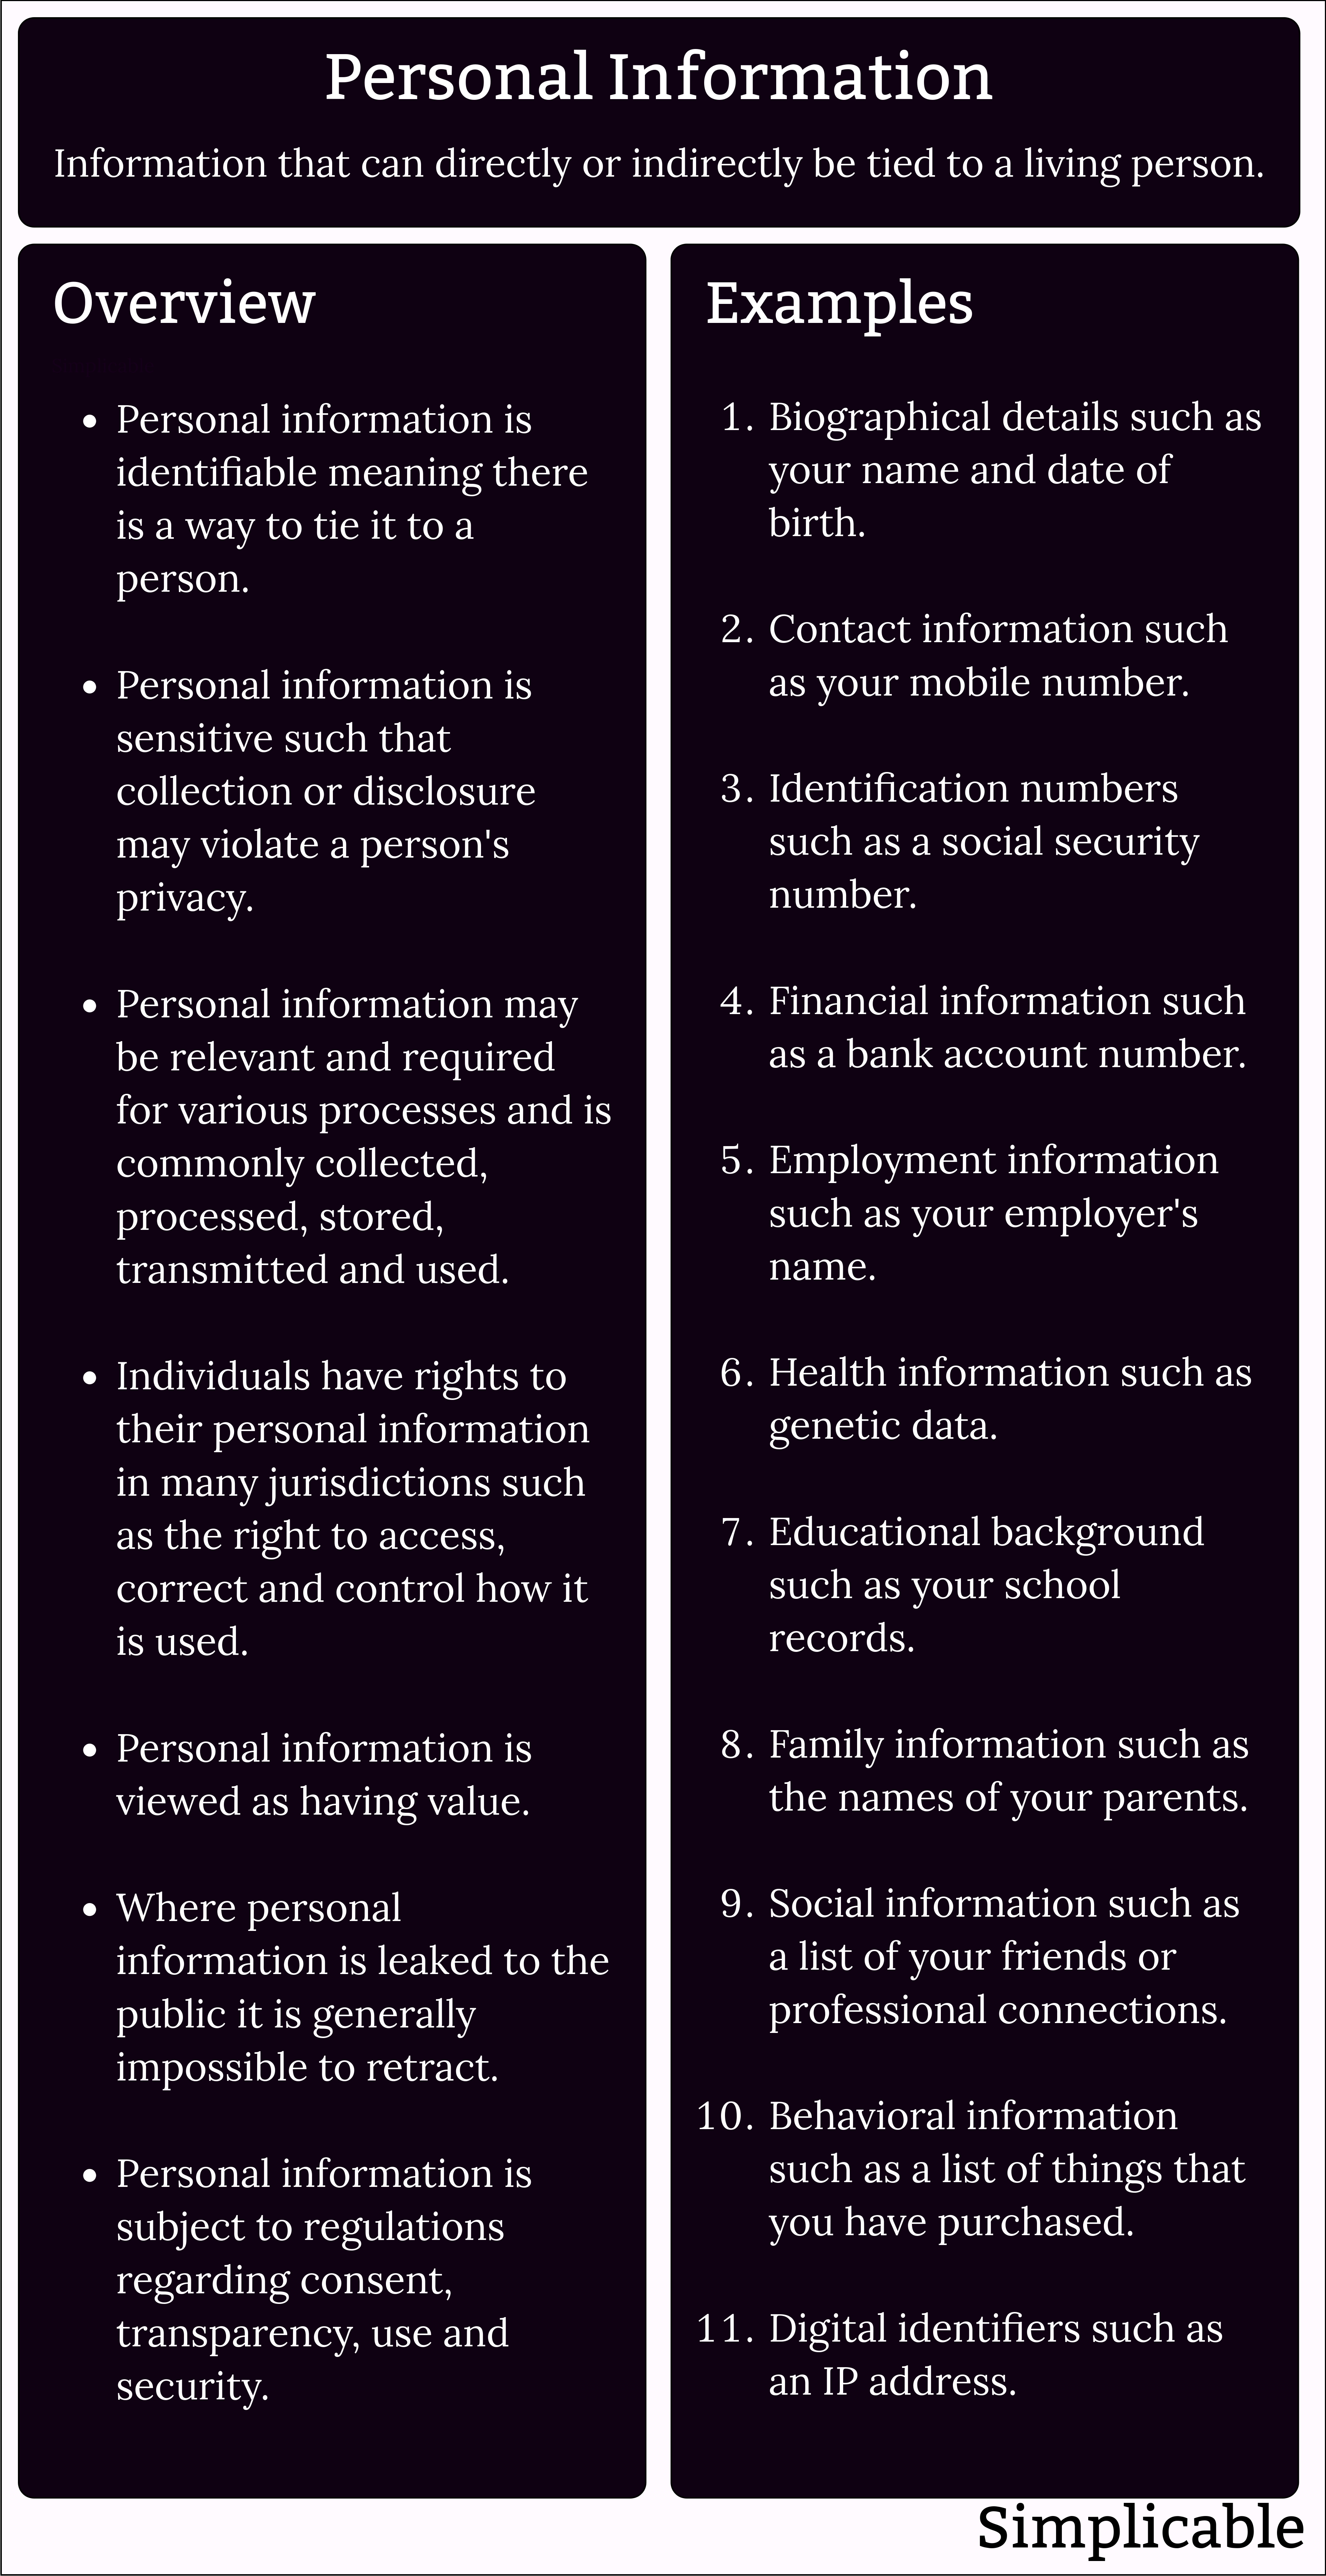 personal information overview and examples